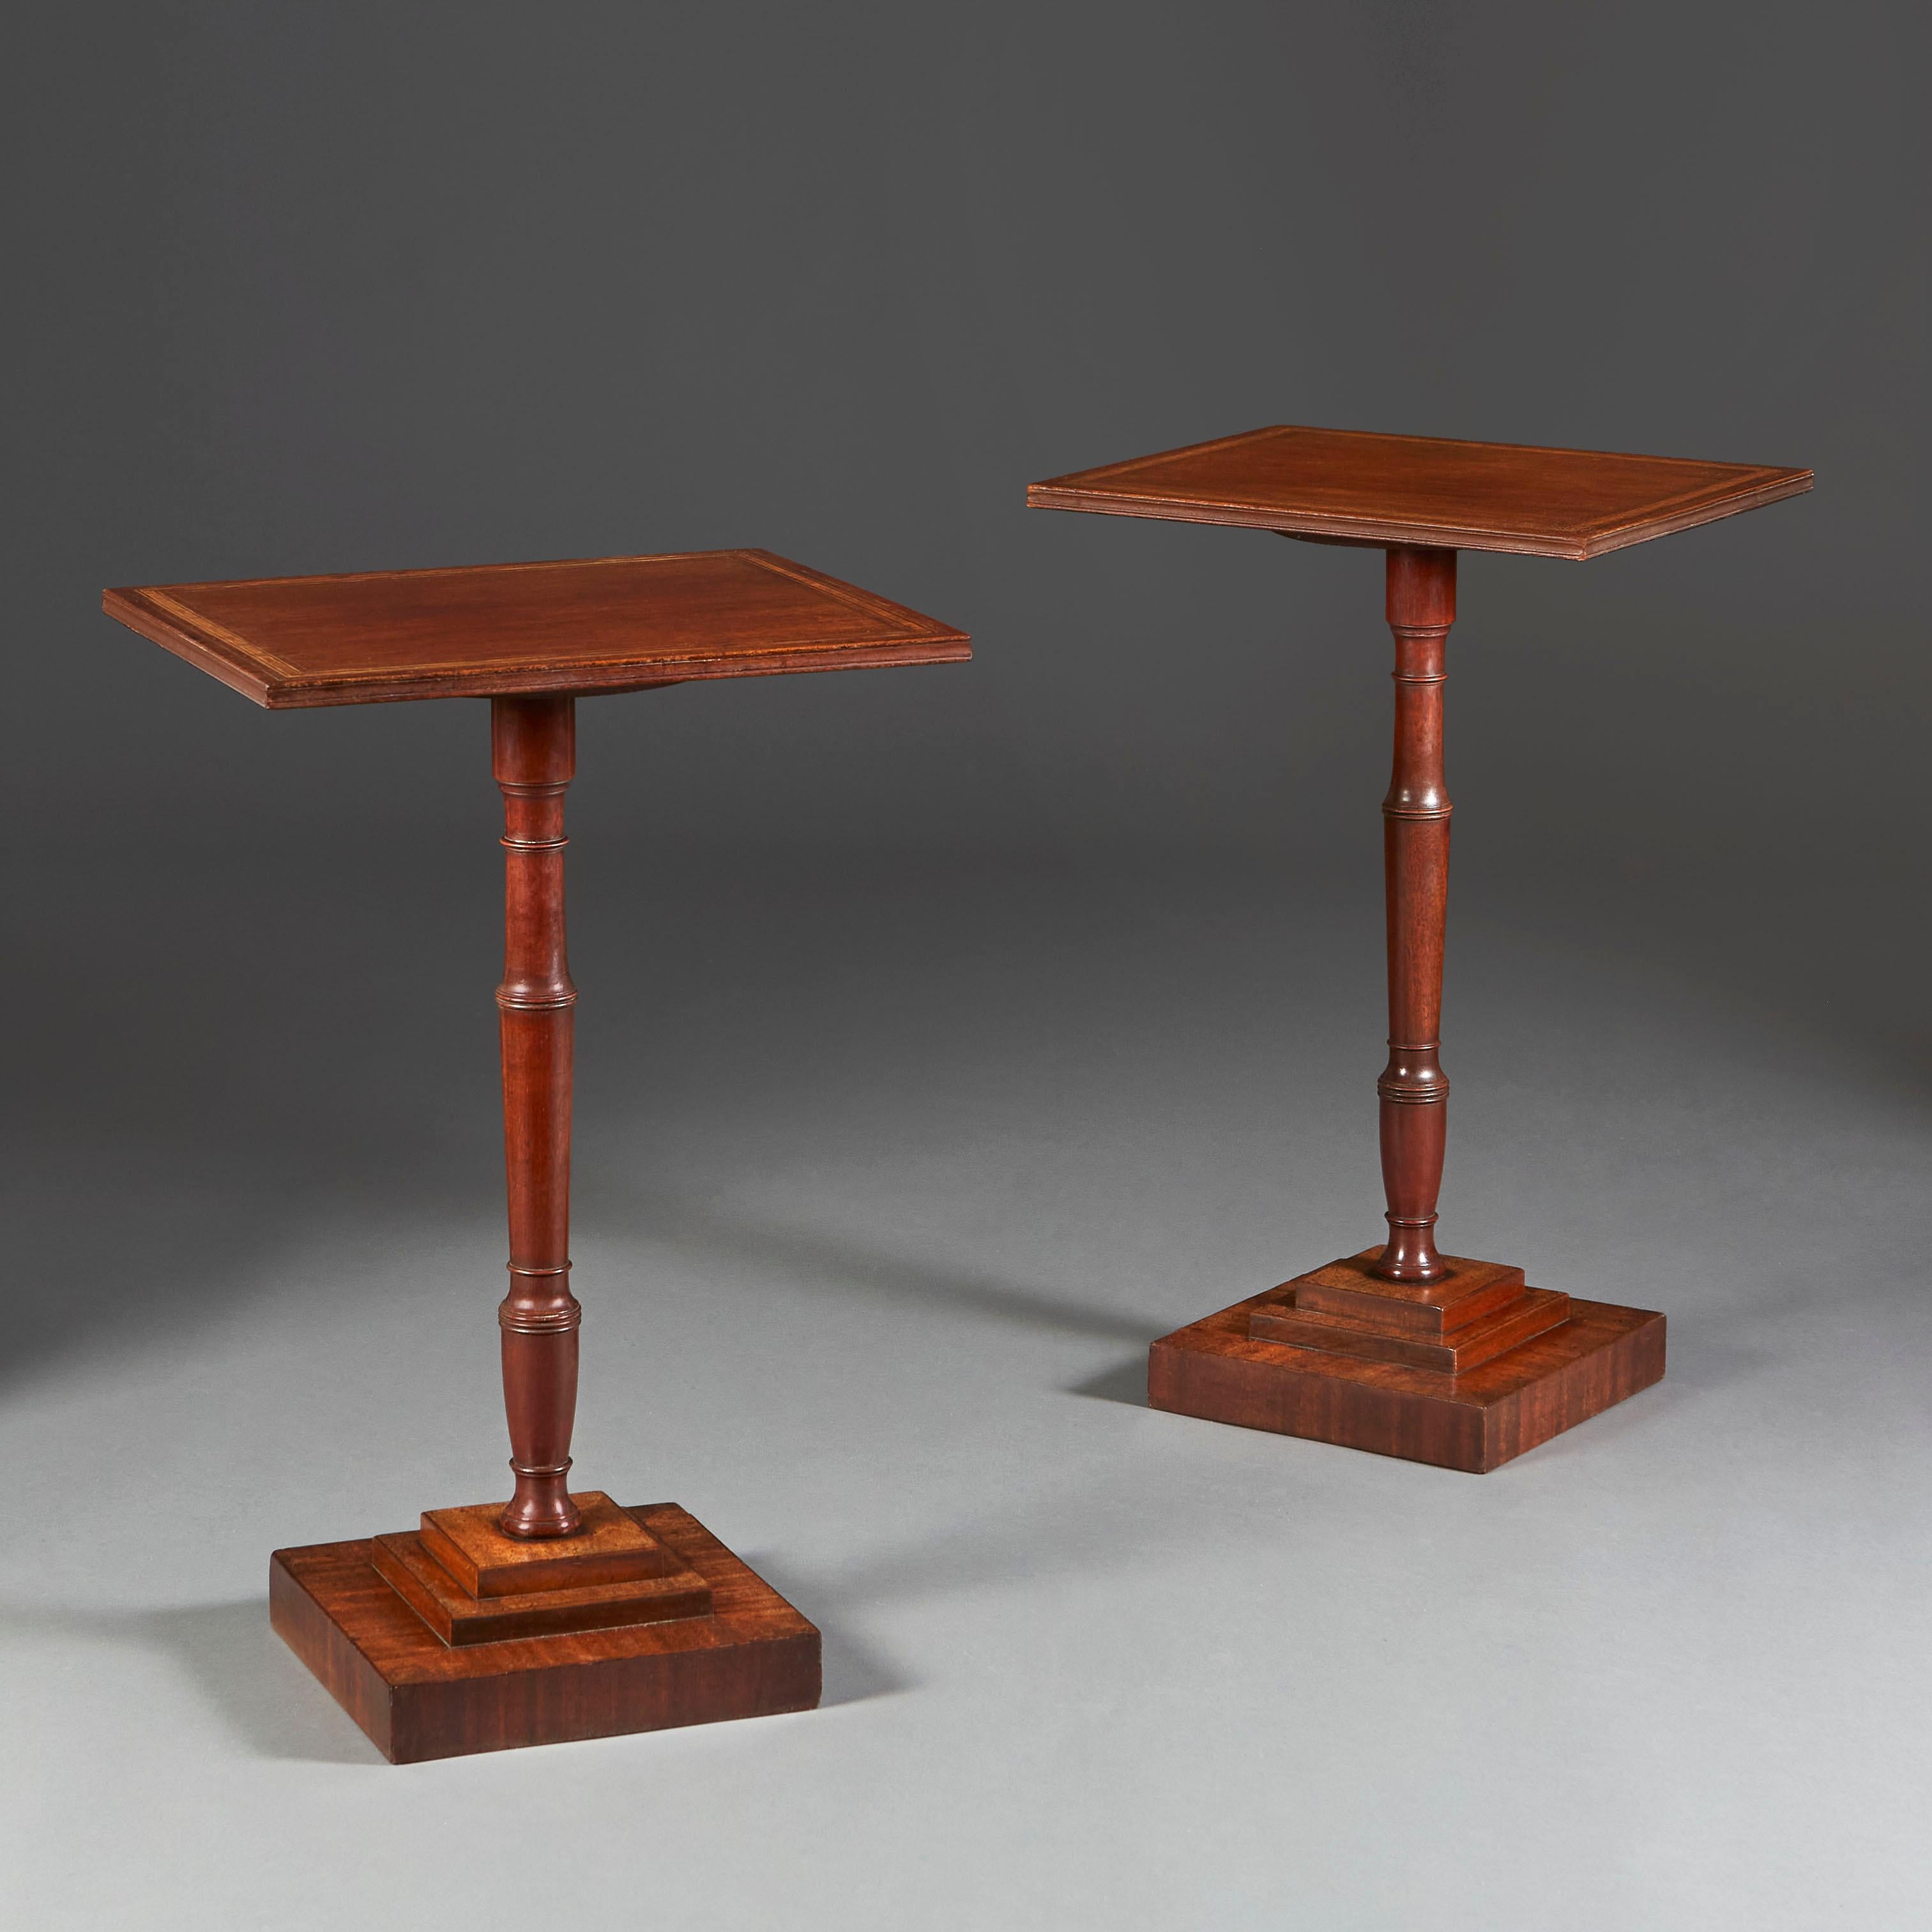 An unusual pair of mid 19th century mahogany occasional tables, crossbanded with tulipwood, supported on turned pedestals and stepped, tiered bases.